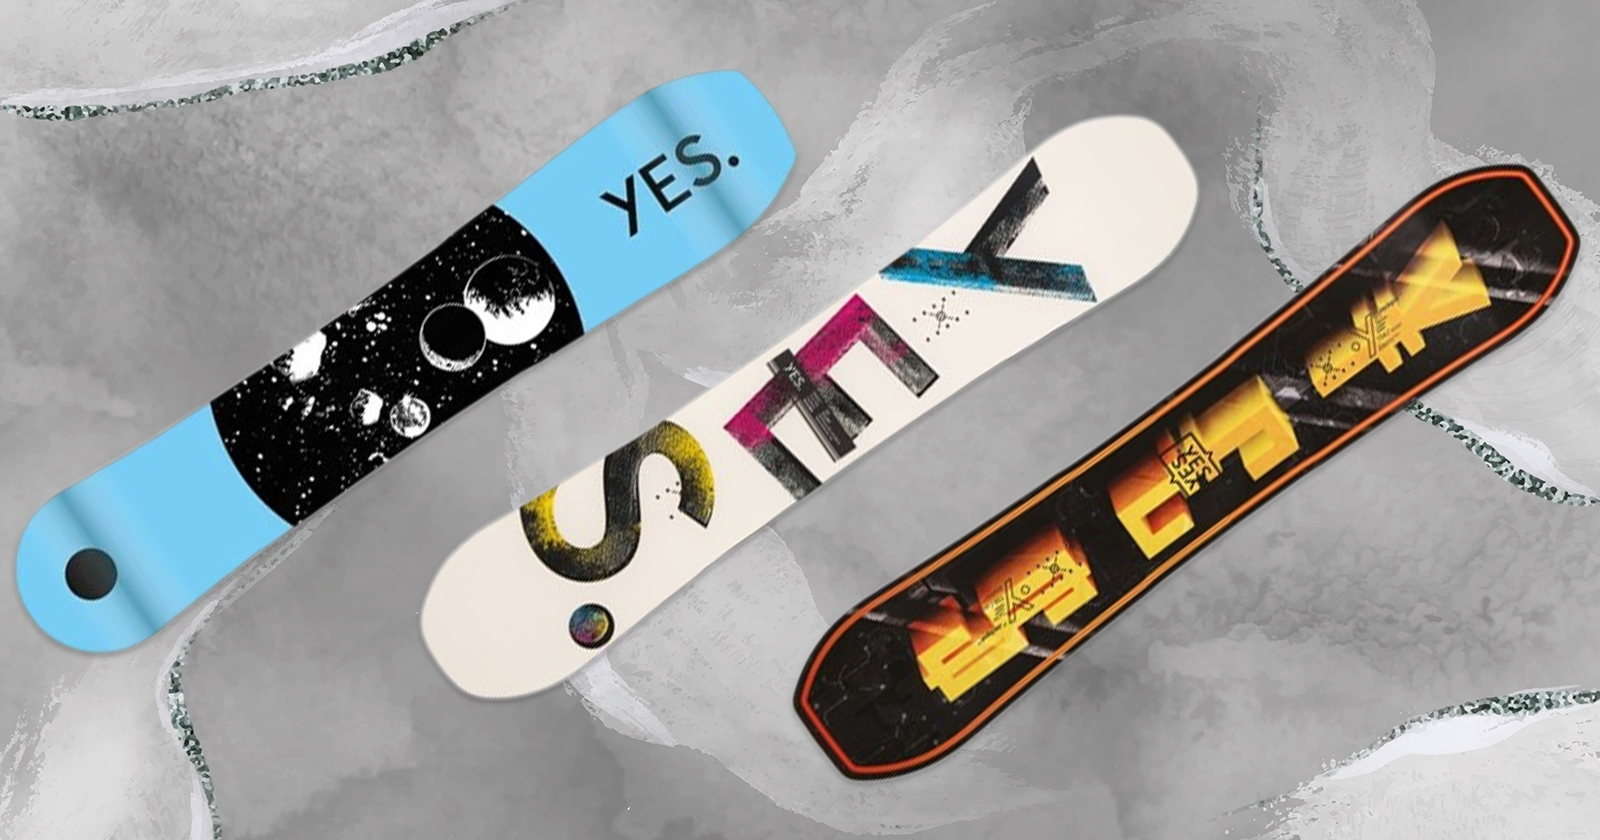 Yes snowboards